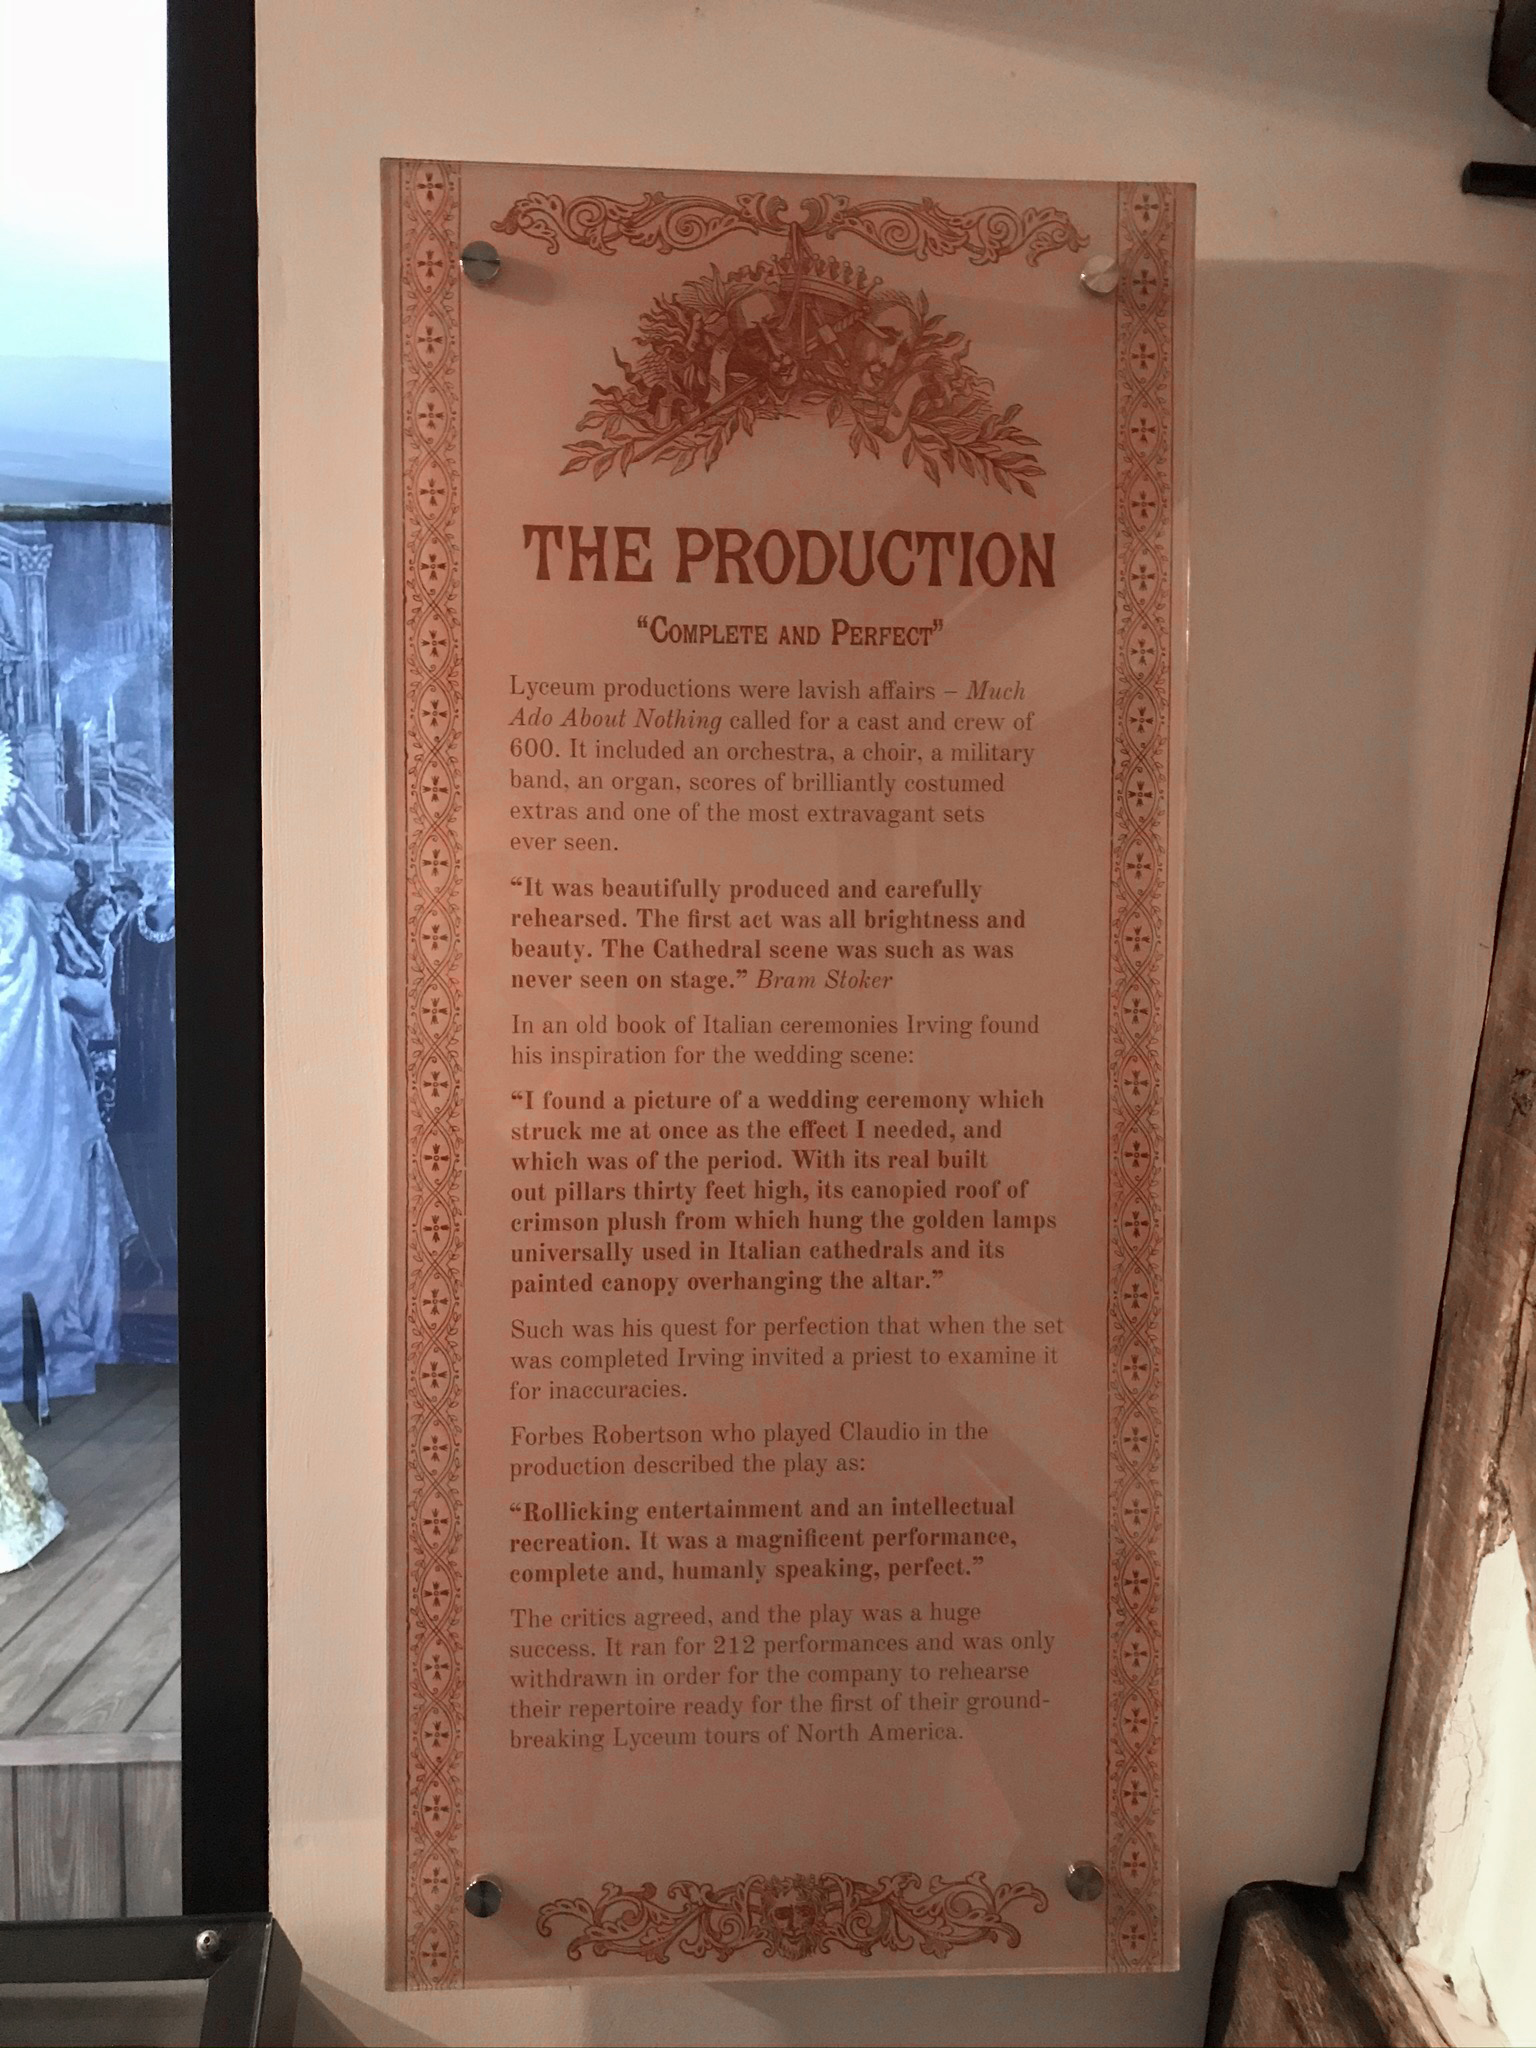 An interpretation panel for the costume display at Smallhythe Place designed by Corvidae Ltd, based on the original theatre programme.